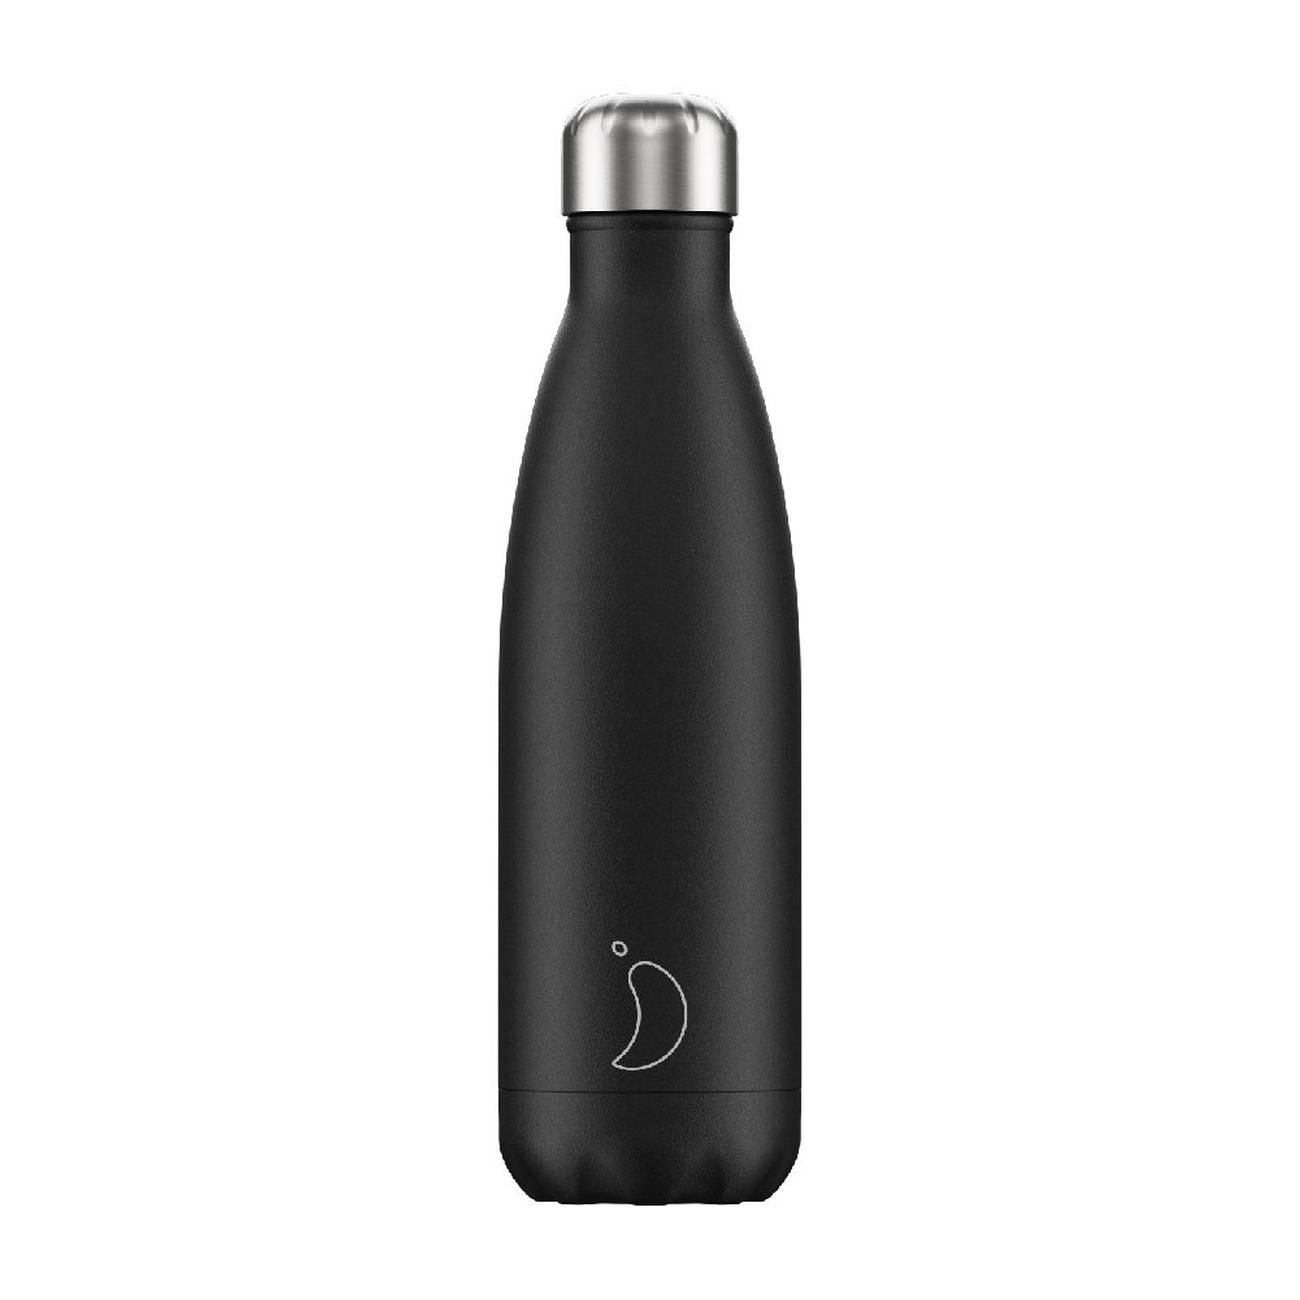 Chilly's Water Bottle - Stainless Steel and Reusable - Leak Proof, Sweat  Free - All Black - 500ml : Buy Online at Best Price in KSA - Souq is now  : Home